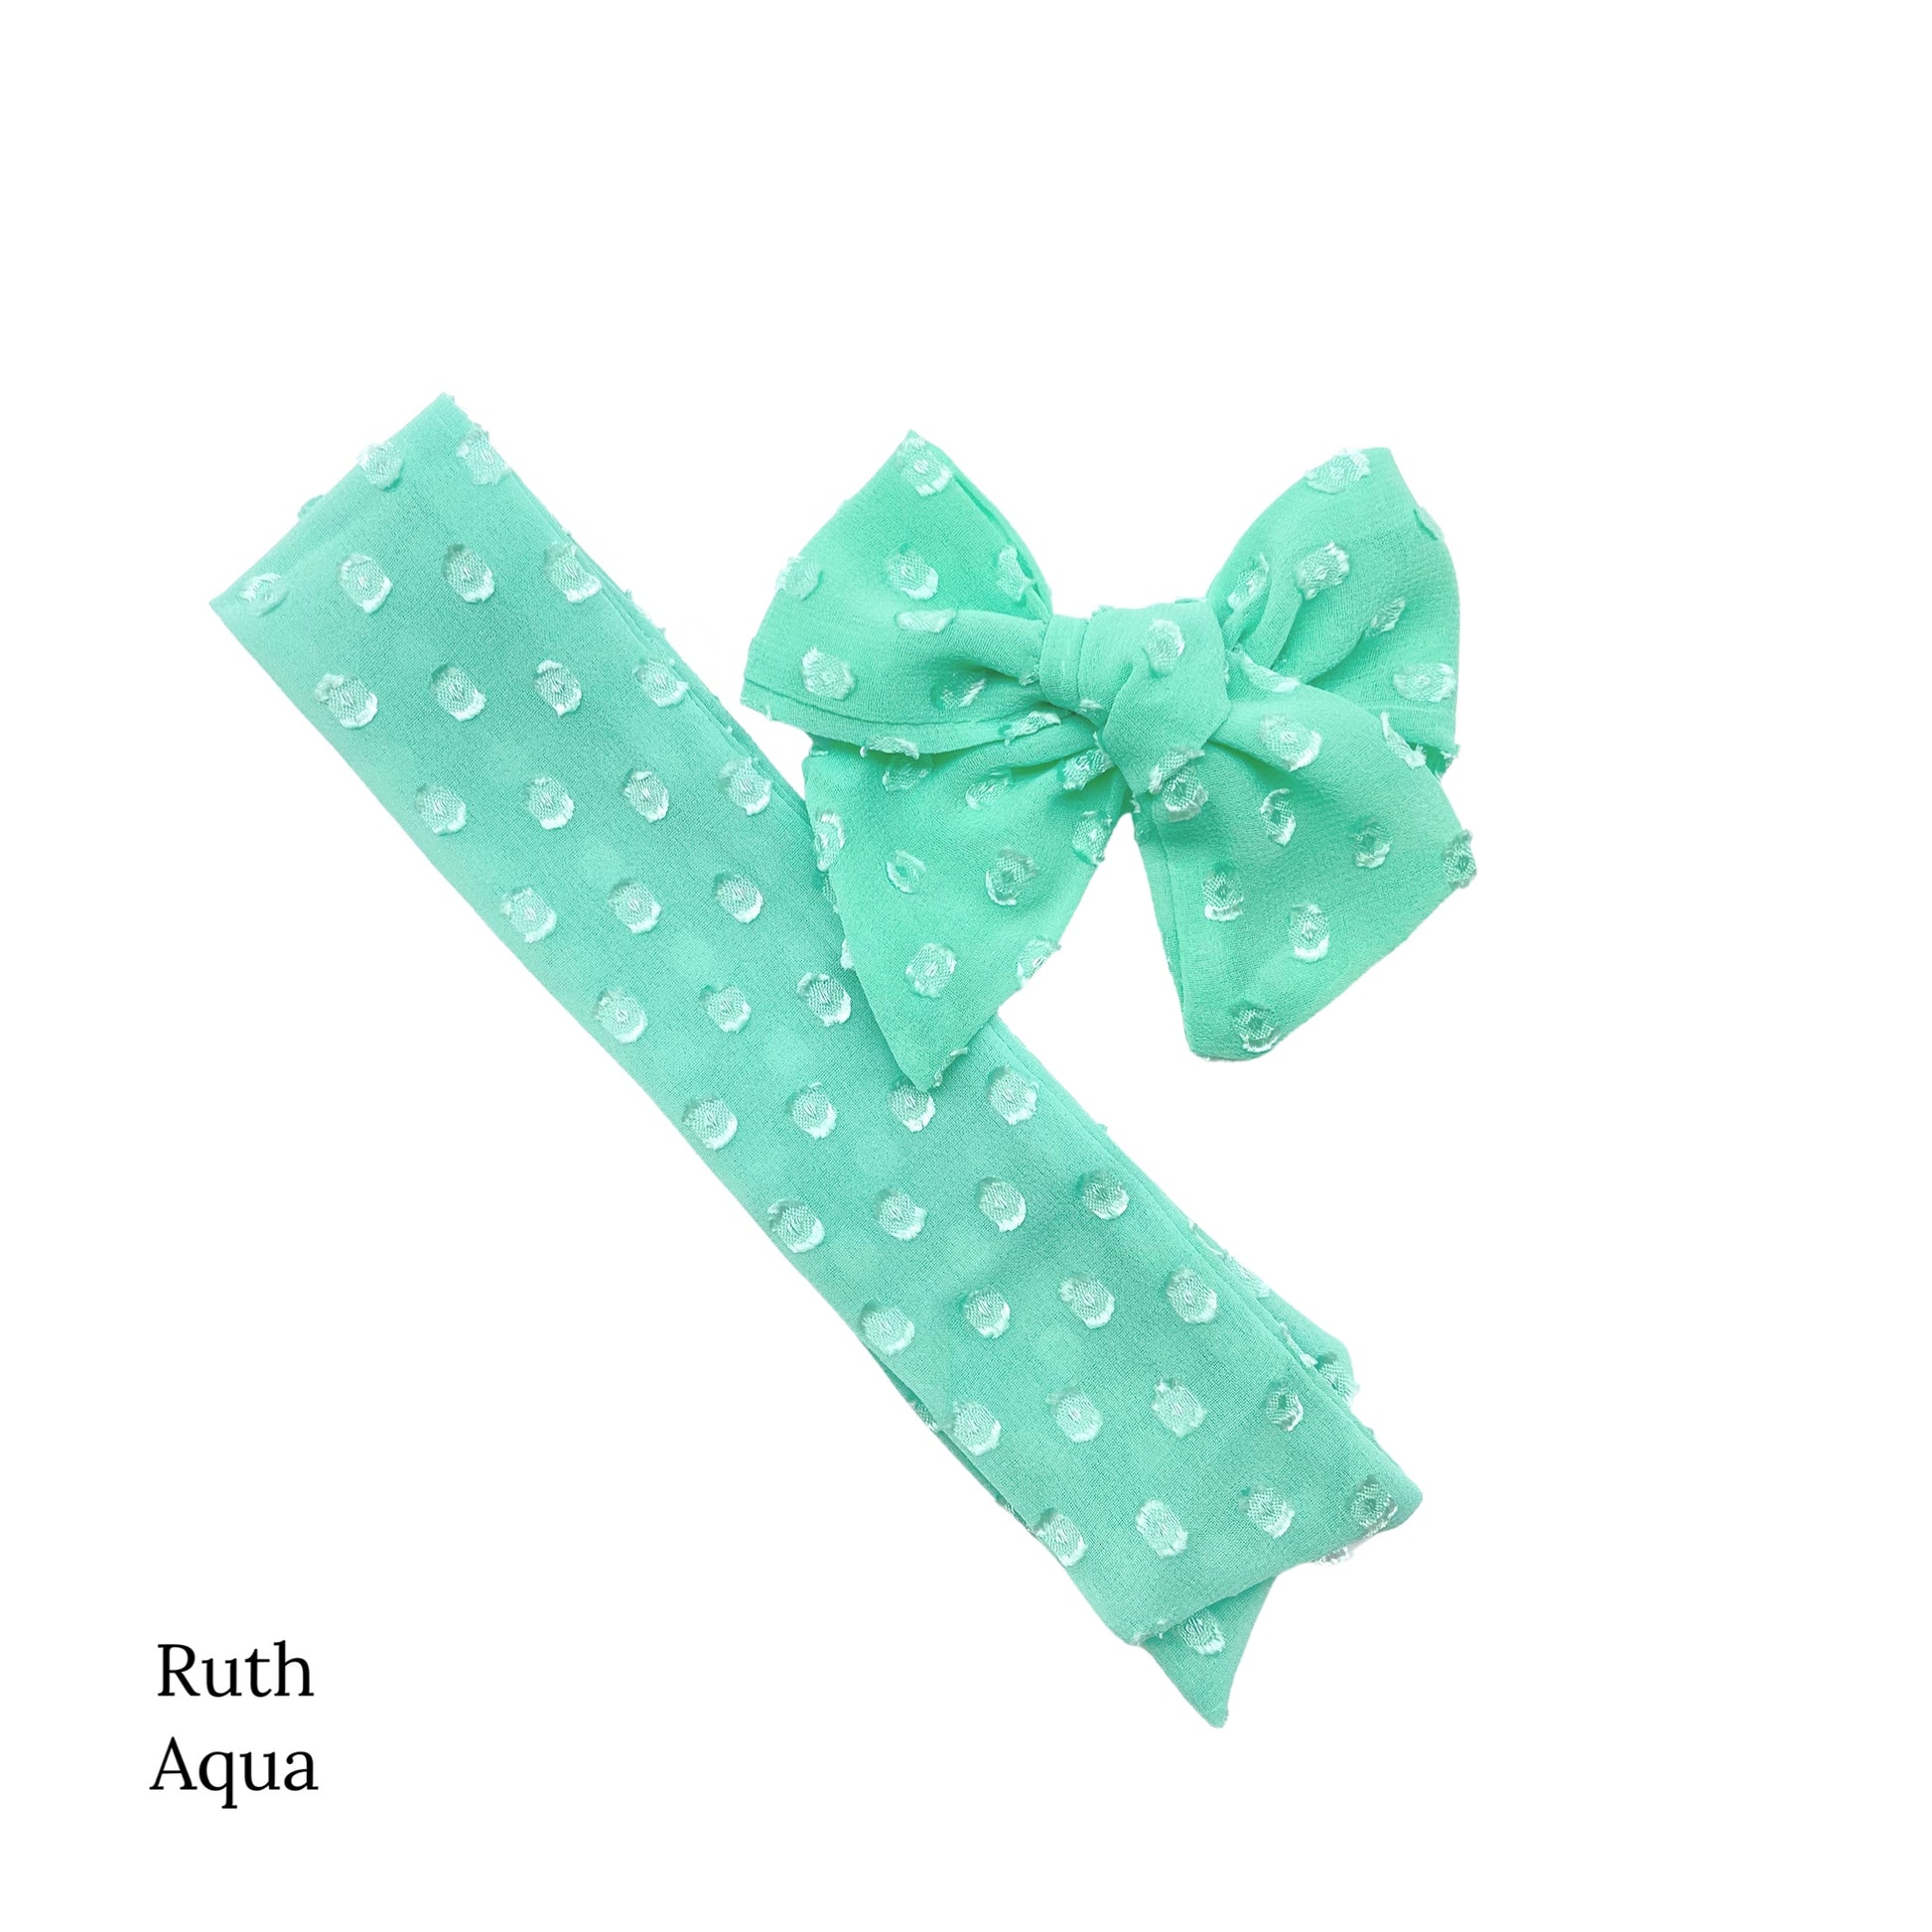 Spring frayed dot fabric bow strips. Aqua colored sailor style bow strip.